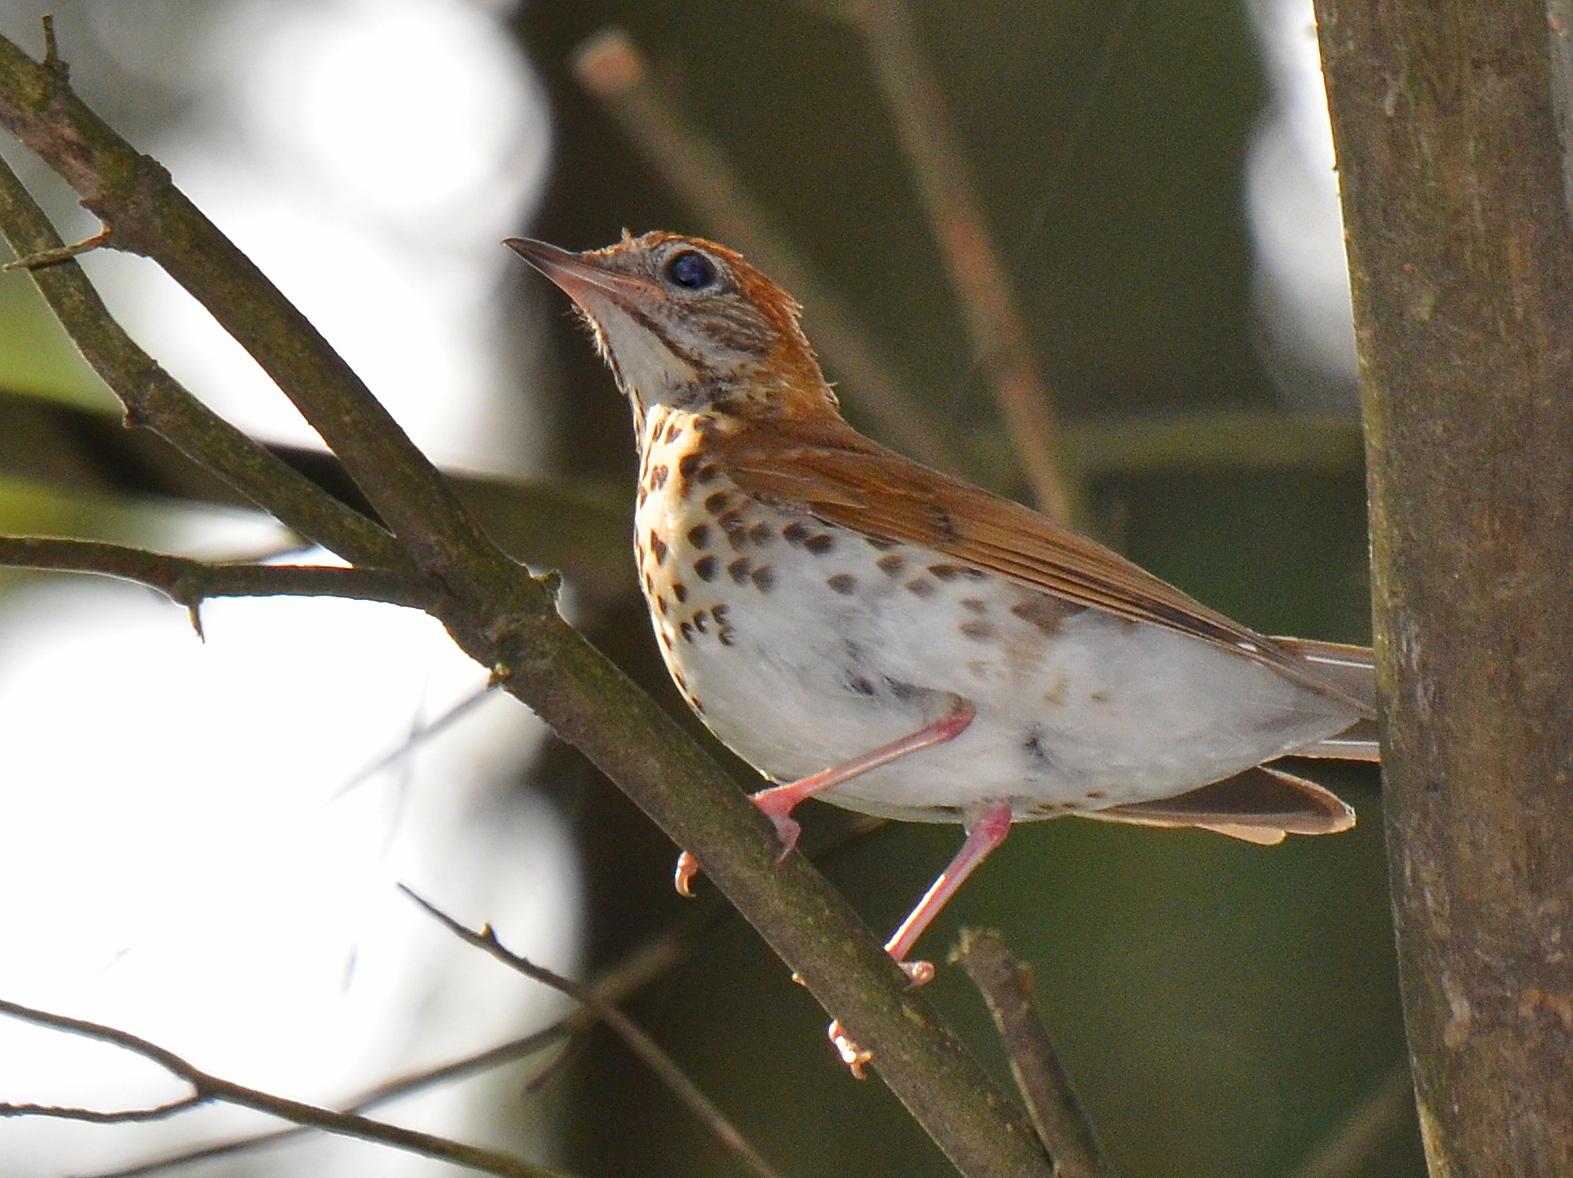 A wood thrush, photographed in Crystal Lake, Illinois.